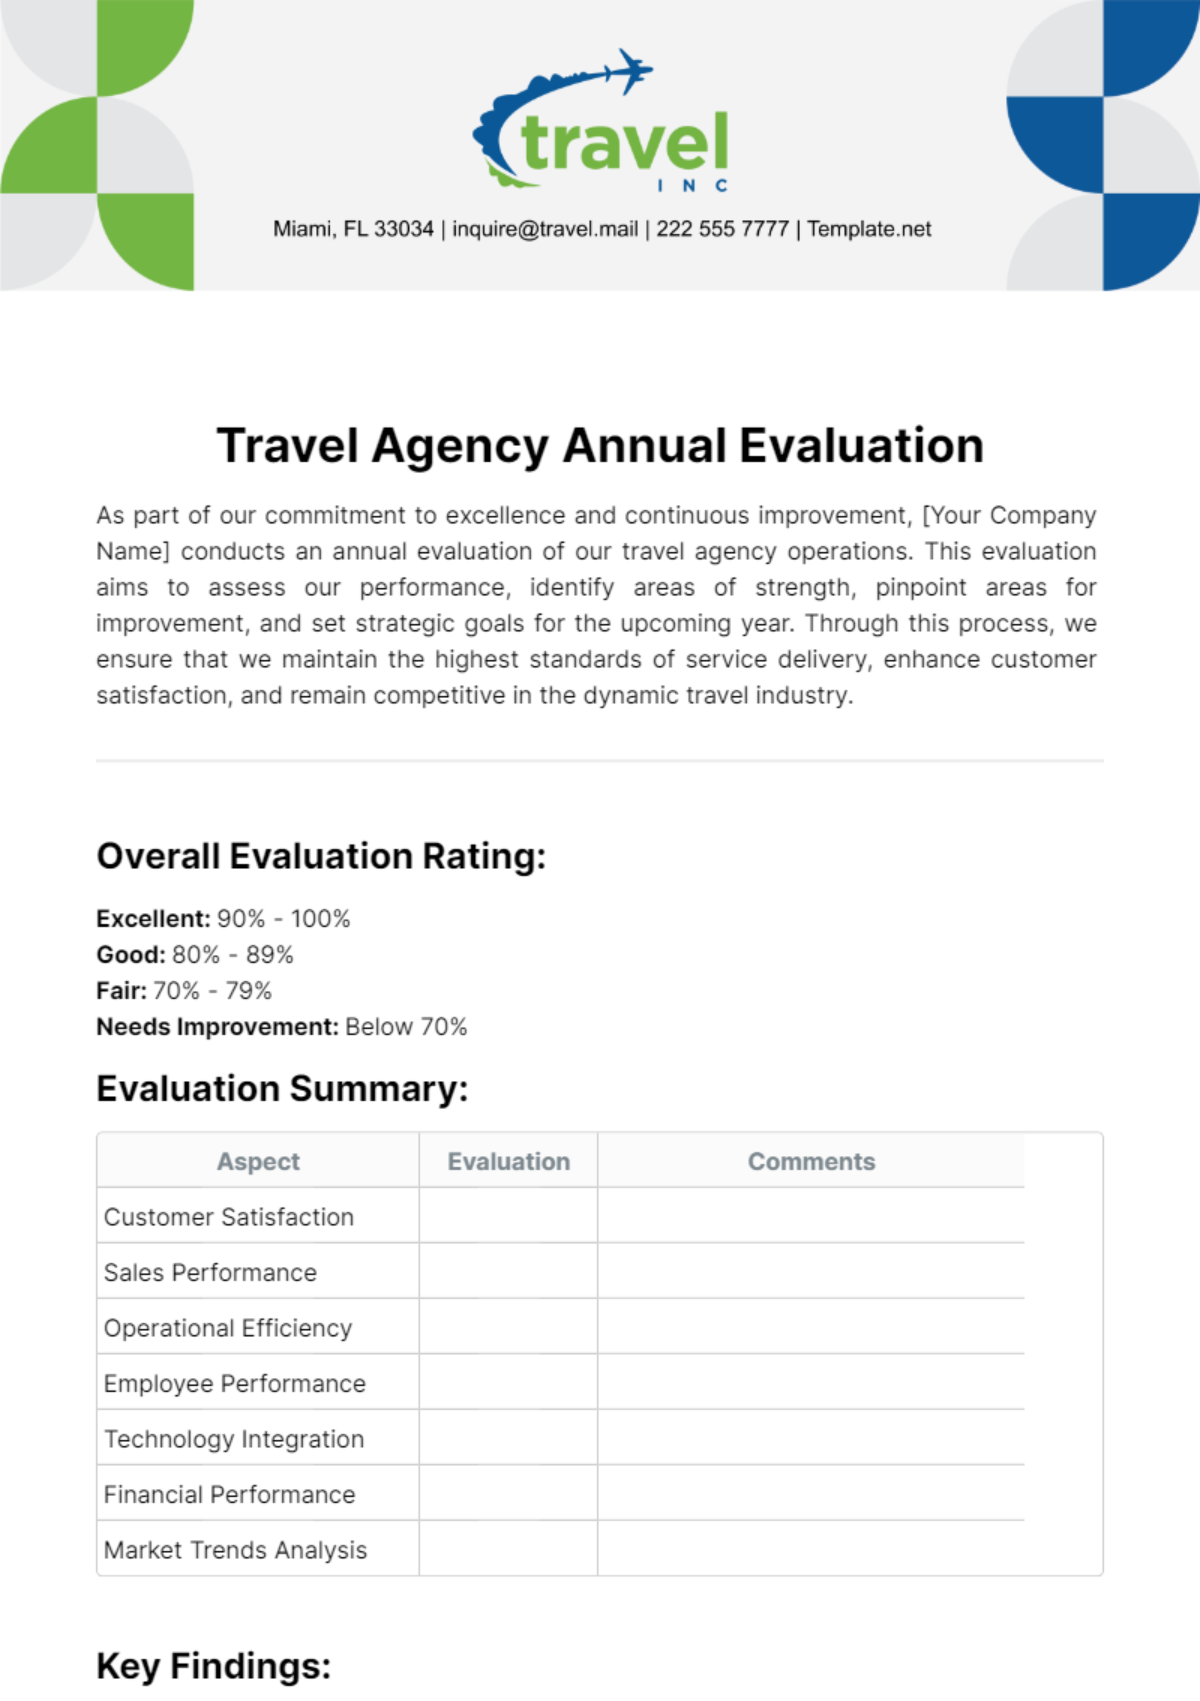 Free Travel Agency Annual Evaluation Template